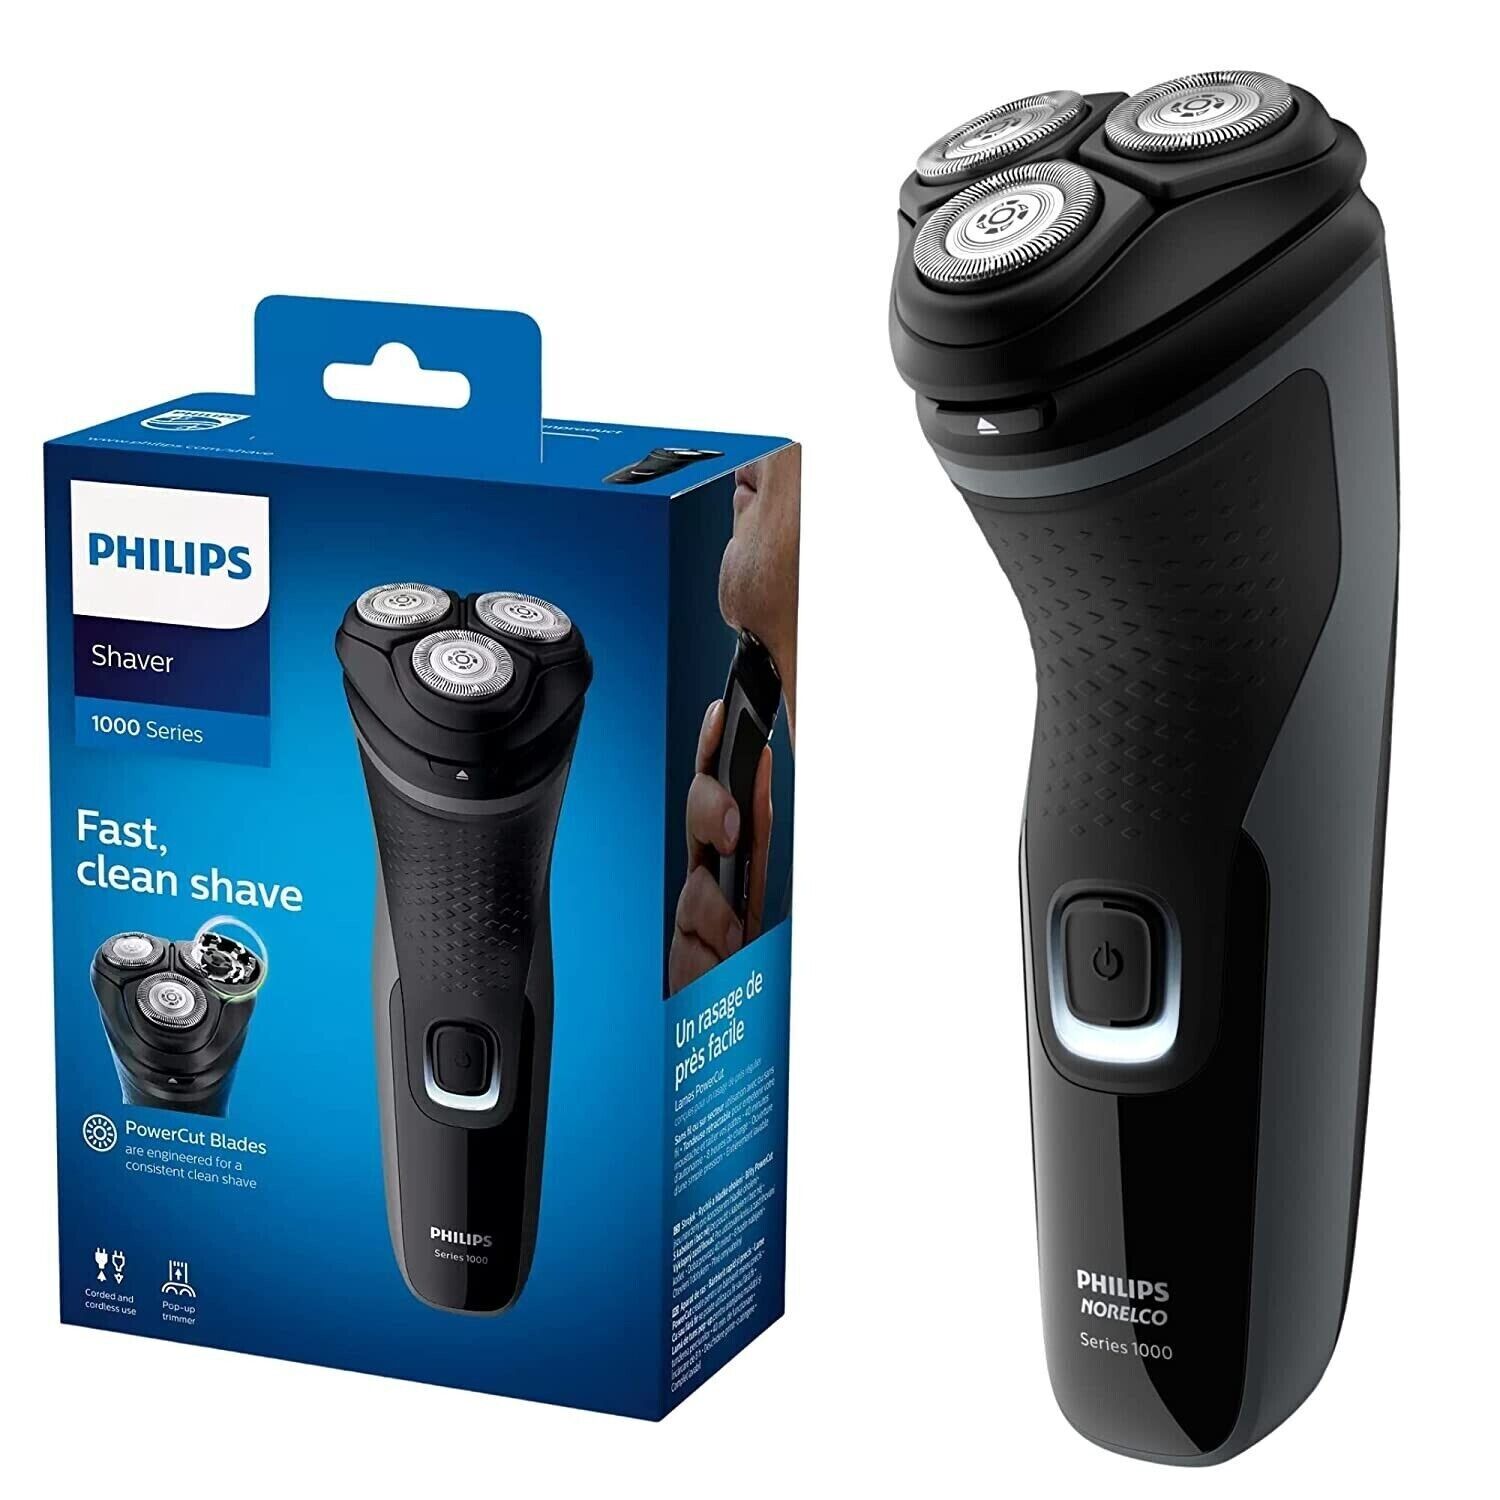 Philips Norelco Electric Shaver Trimmer Series 2000 Men's Shaver